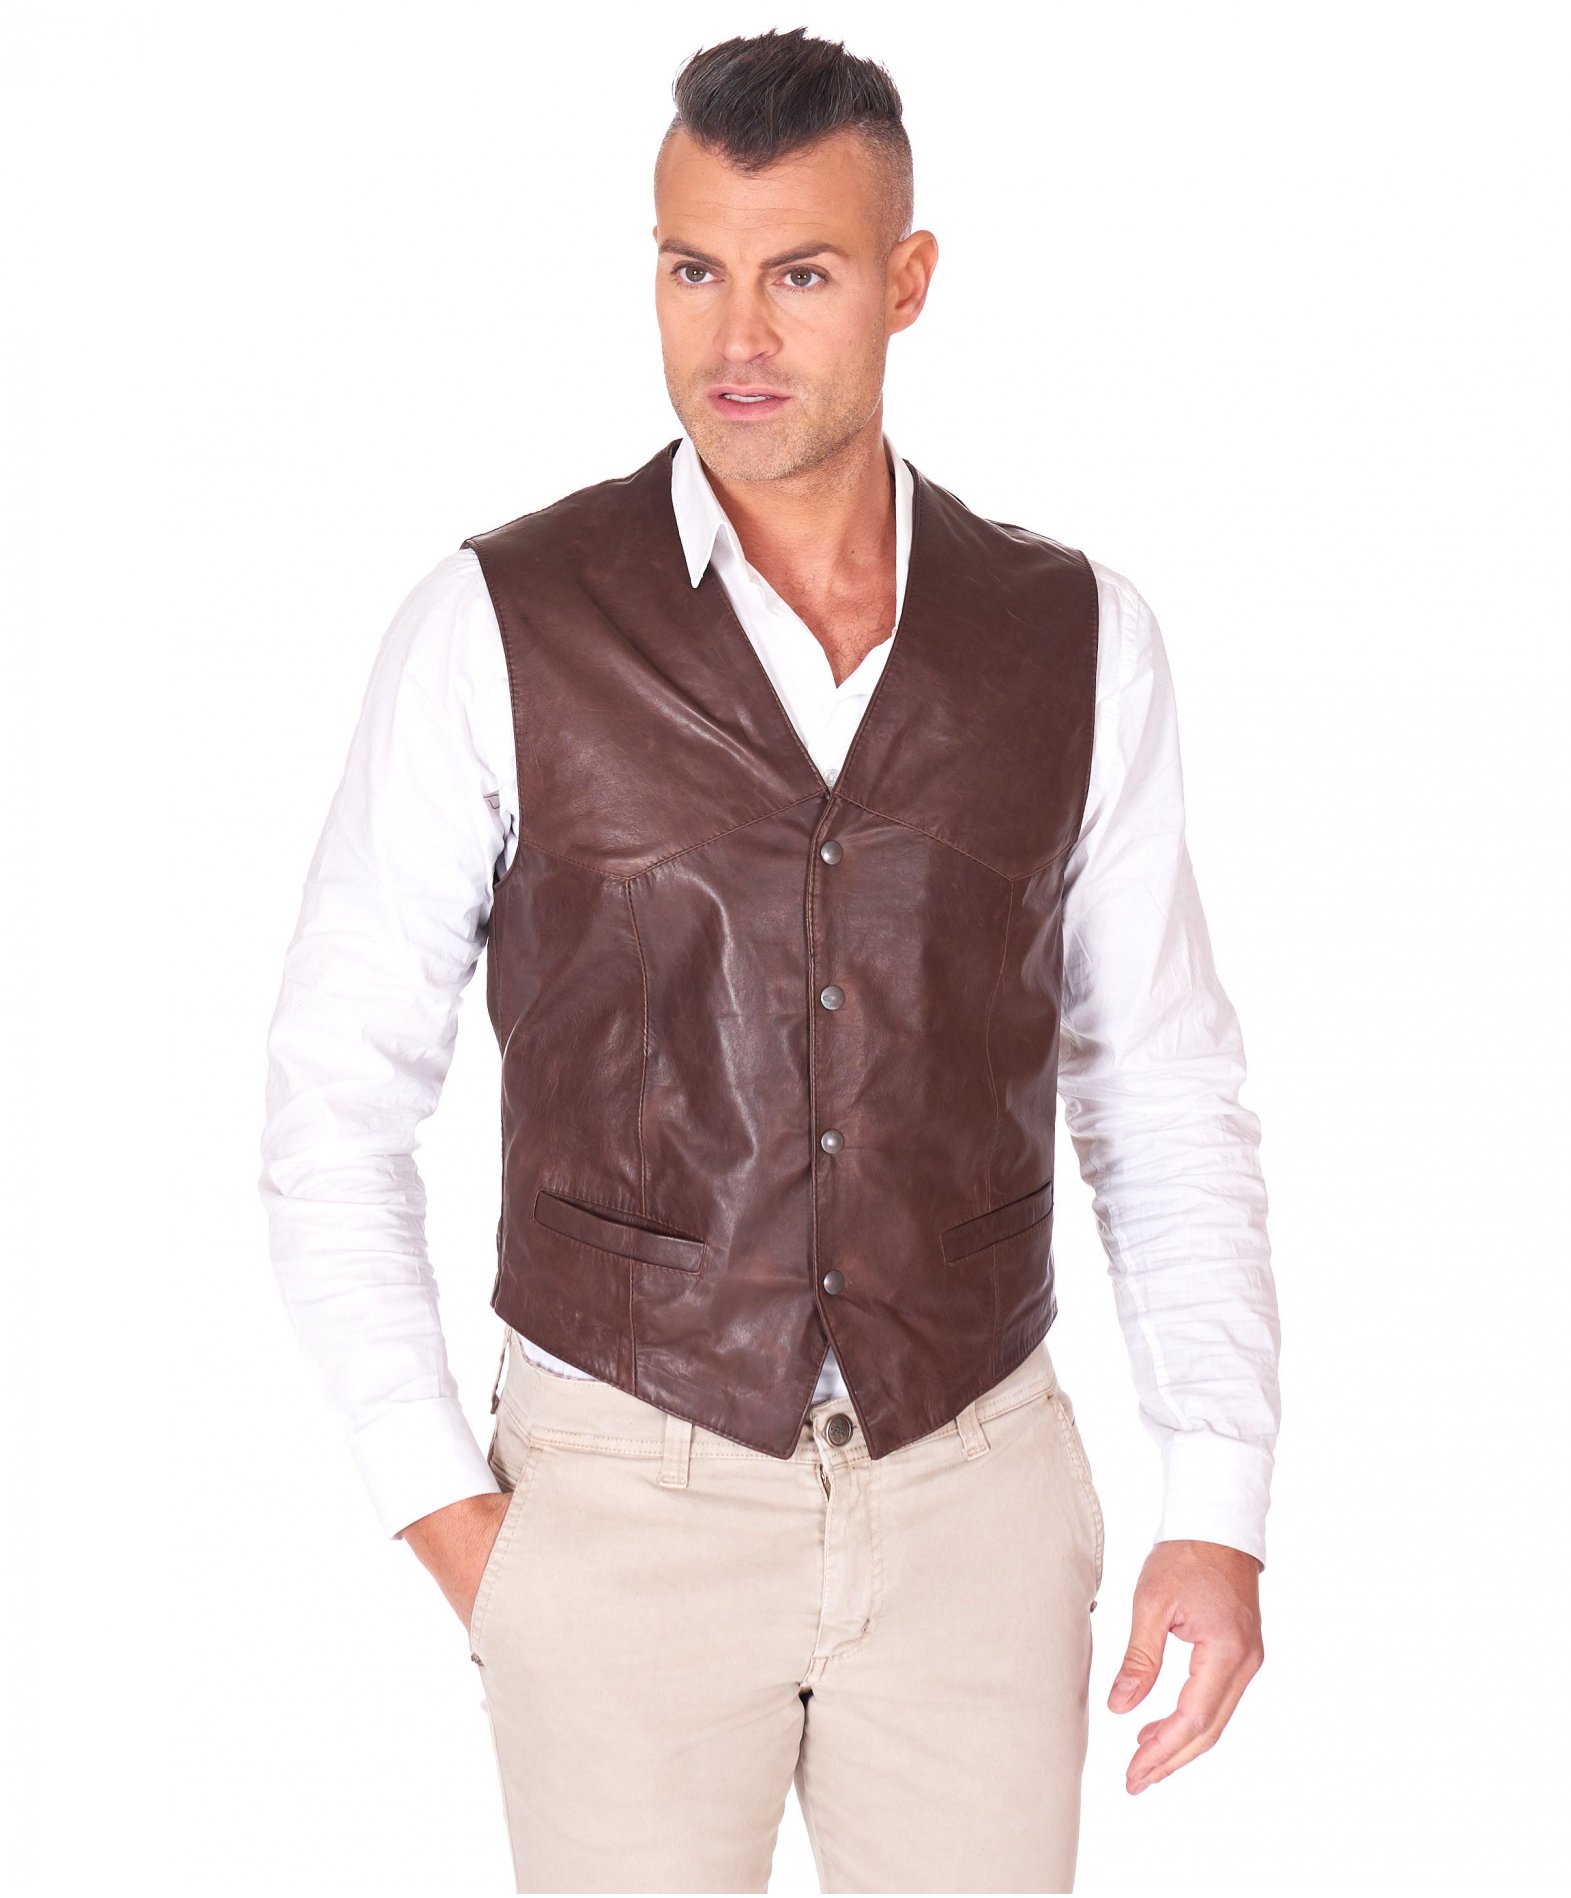 ManVest Leather sleeveless gilet jacket soft leather brown Gilet